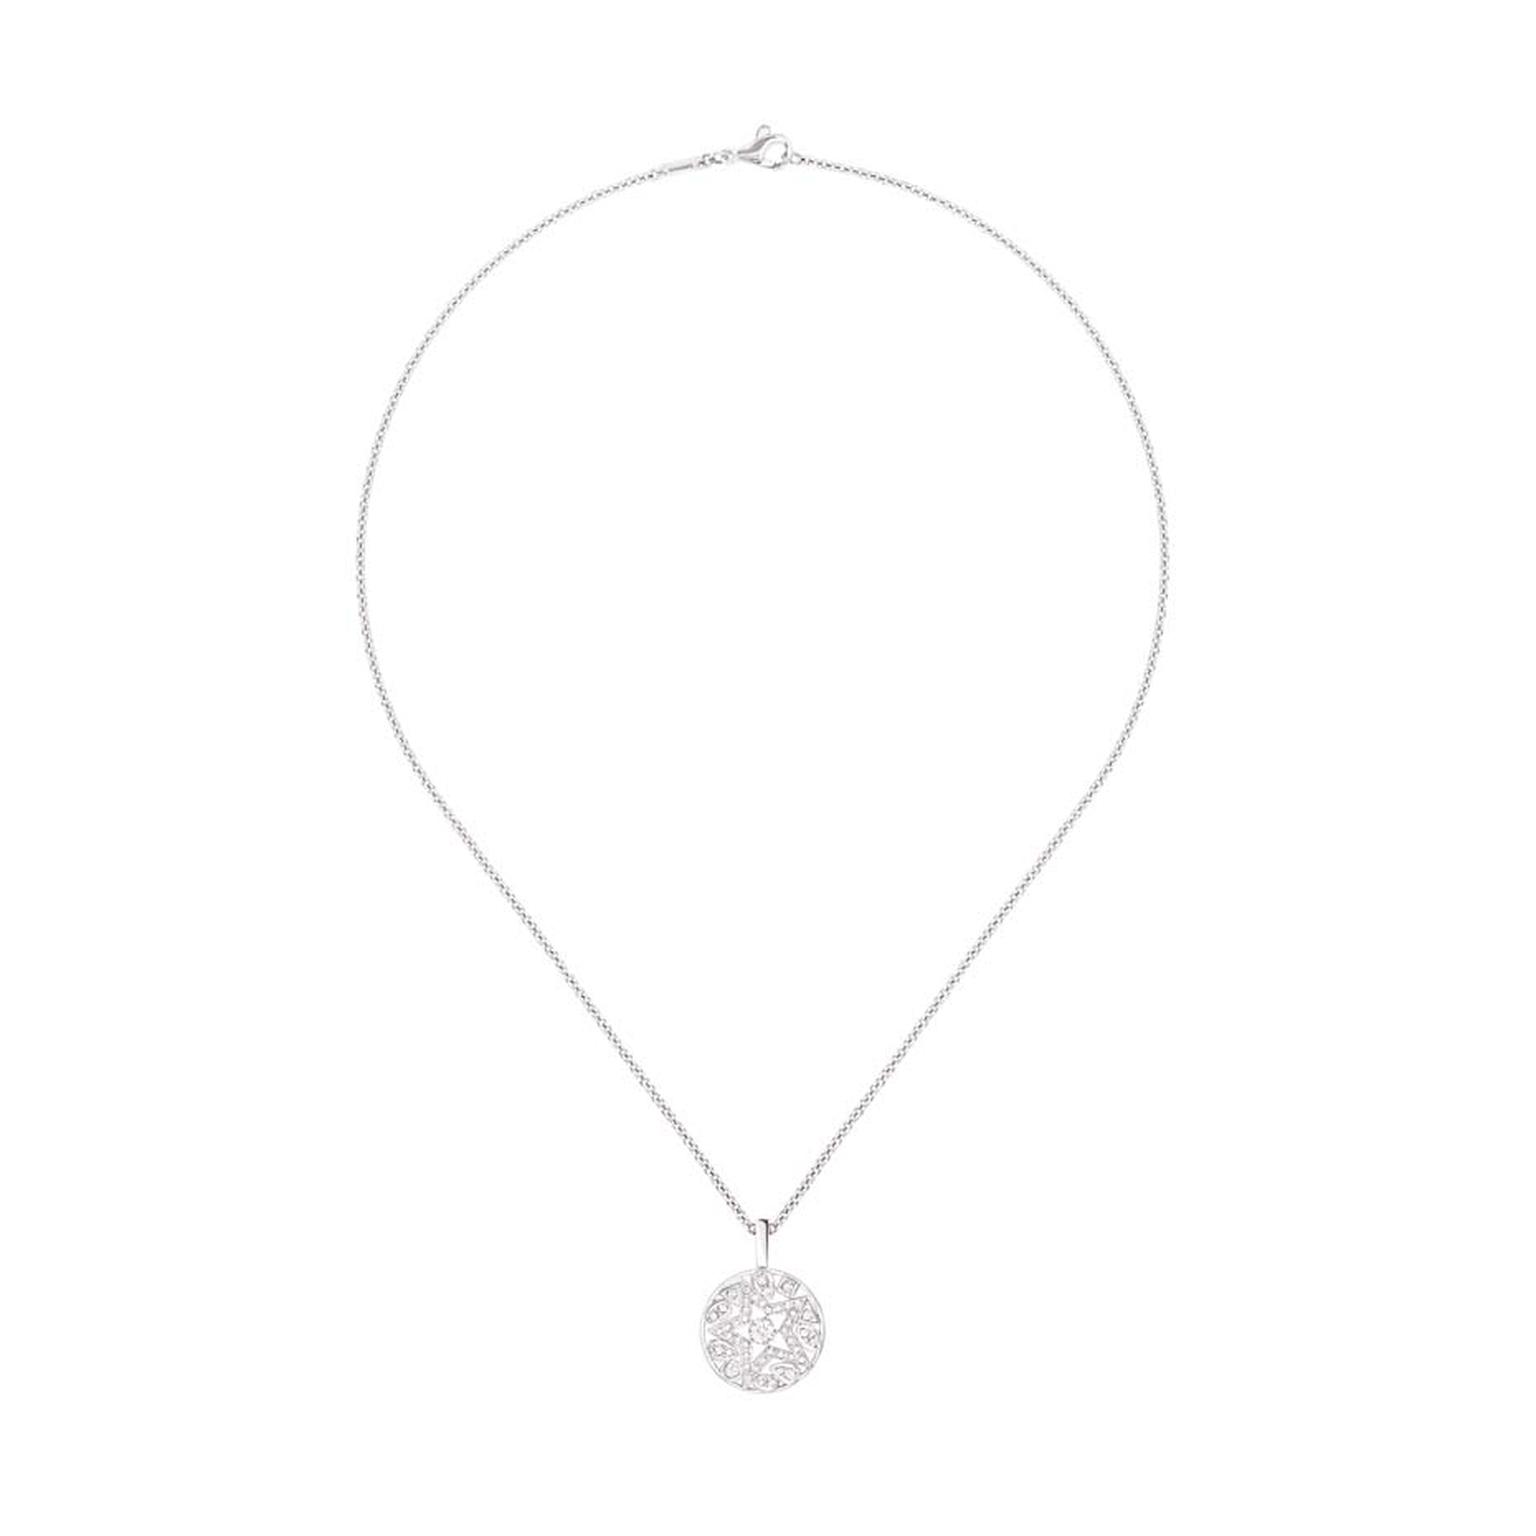 Chanel Étoile Filante white gold pendant with brilliant-cut diamonds, from the Comete collection, which launches in store this month.